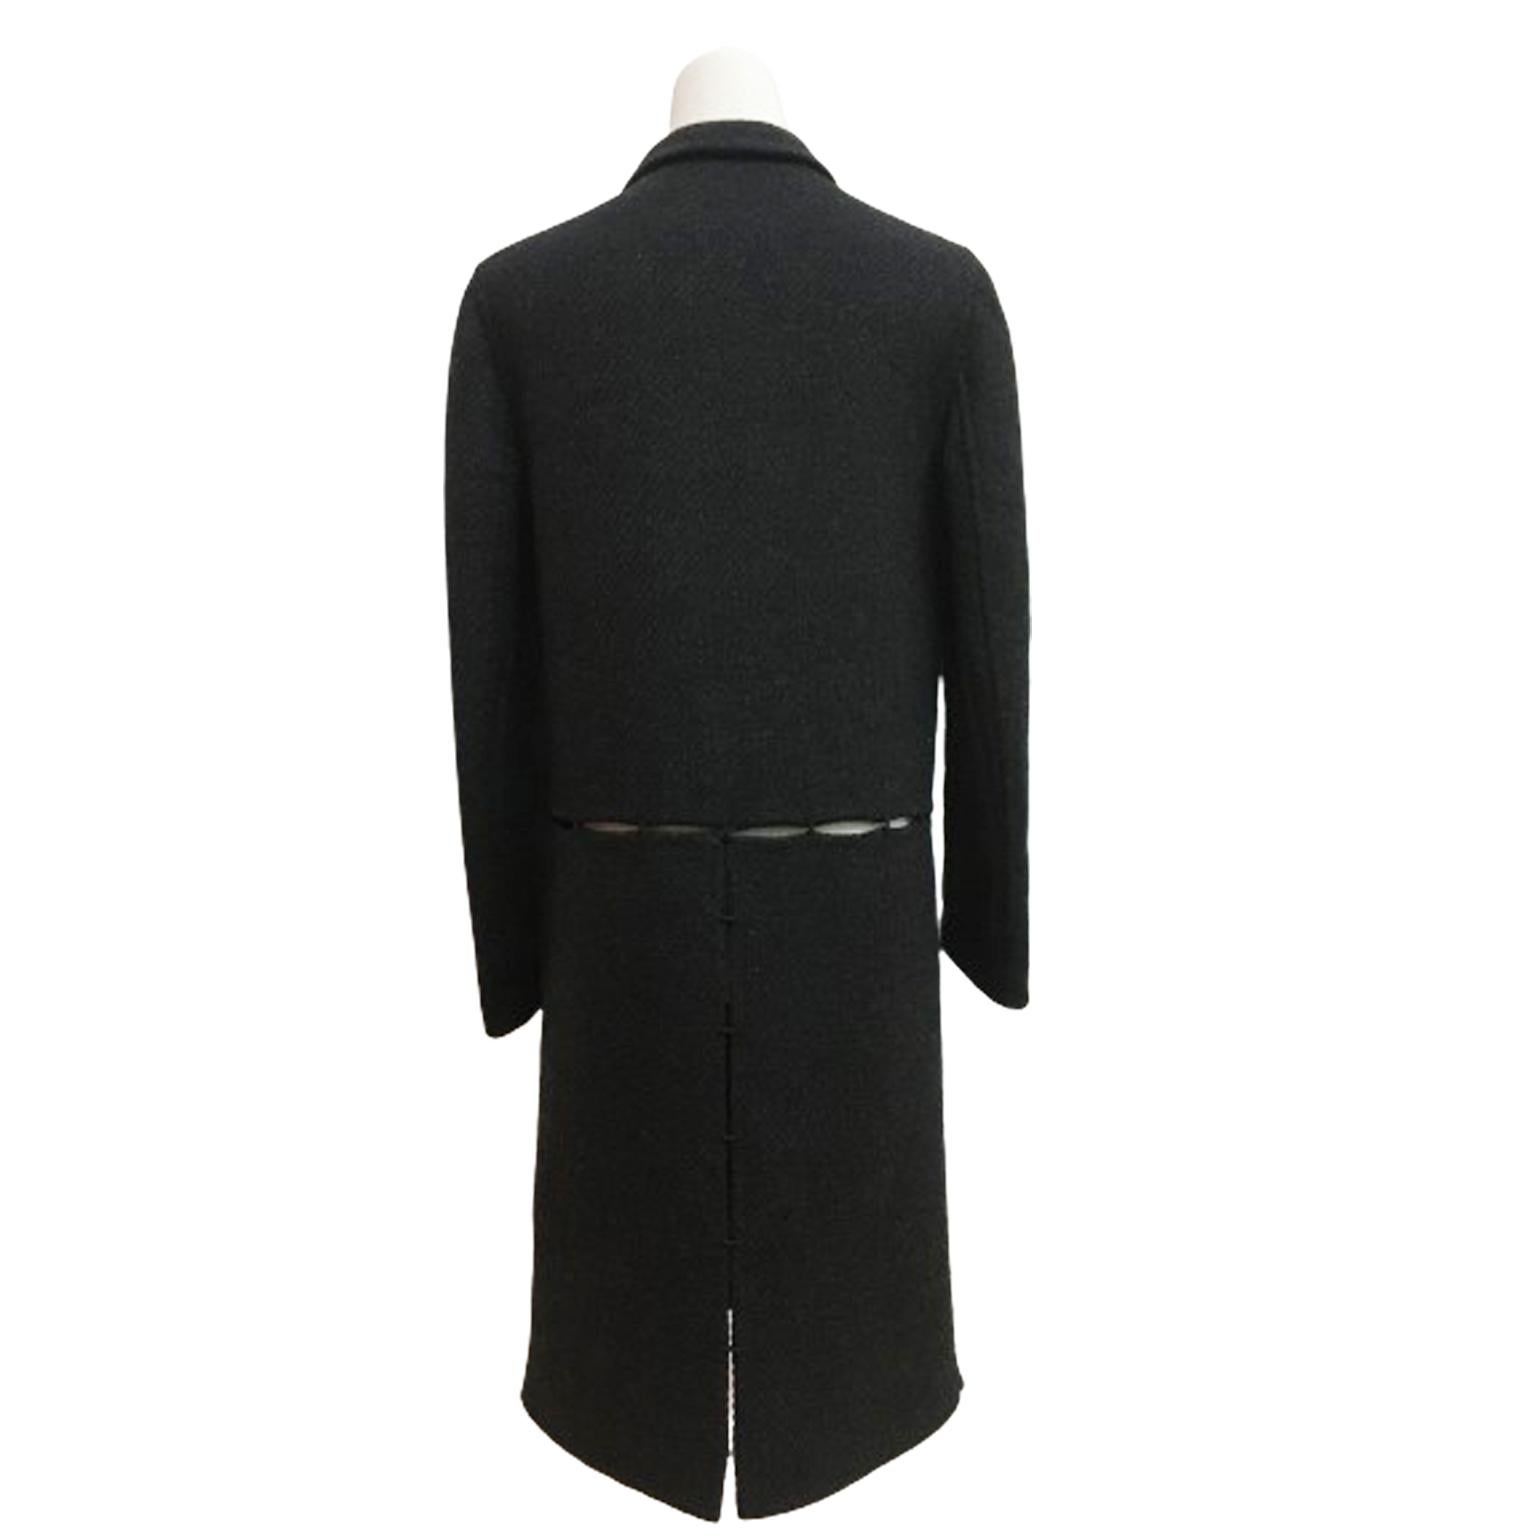 Beautiful Prada wool Black / dark grey wool coat from circa 1990s.
Super forward architectural design. 
Front and back - horizontally divided as stripes and they are conjuncted with strong yarns. 
No lining, snap buttons closure. 
Size  : 38 IT